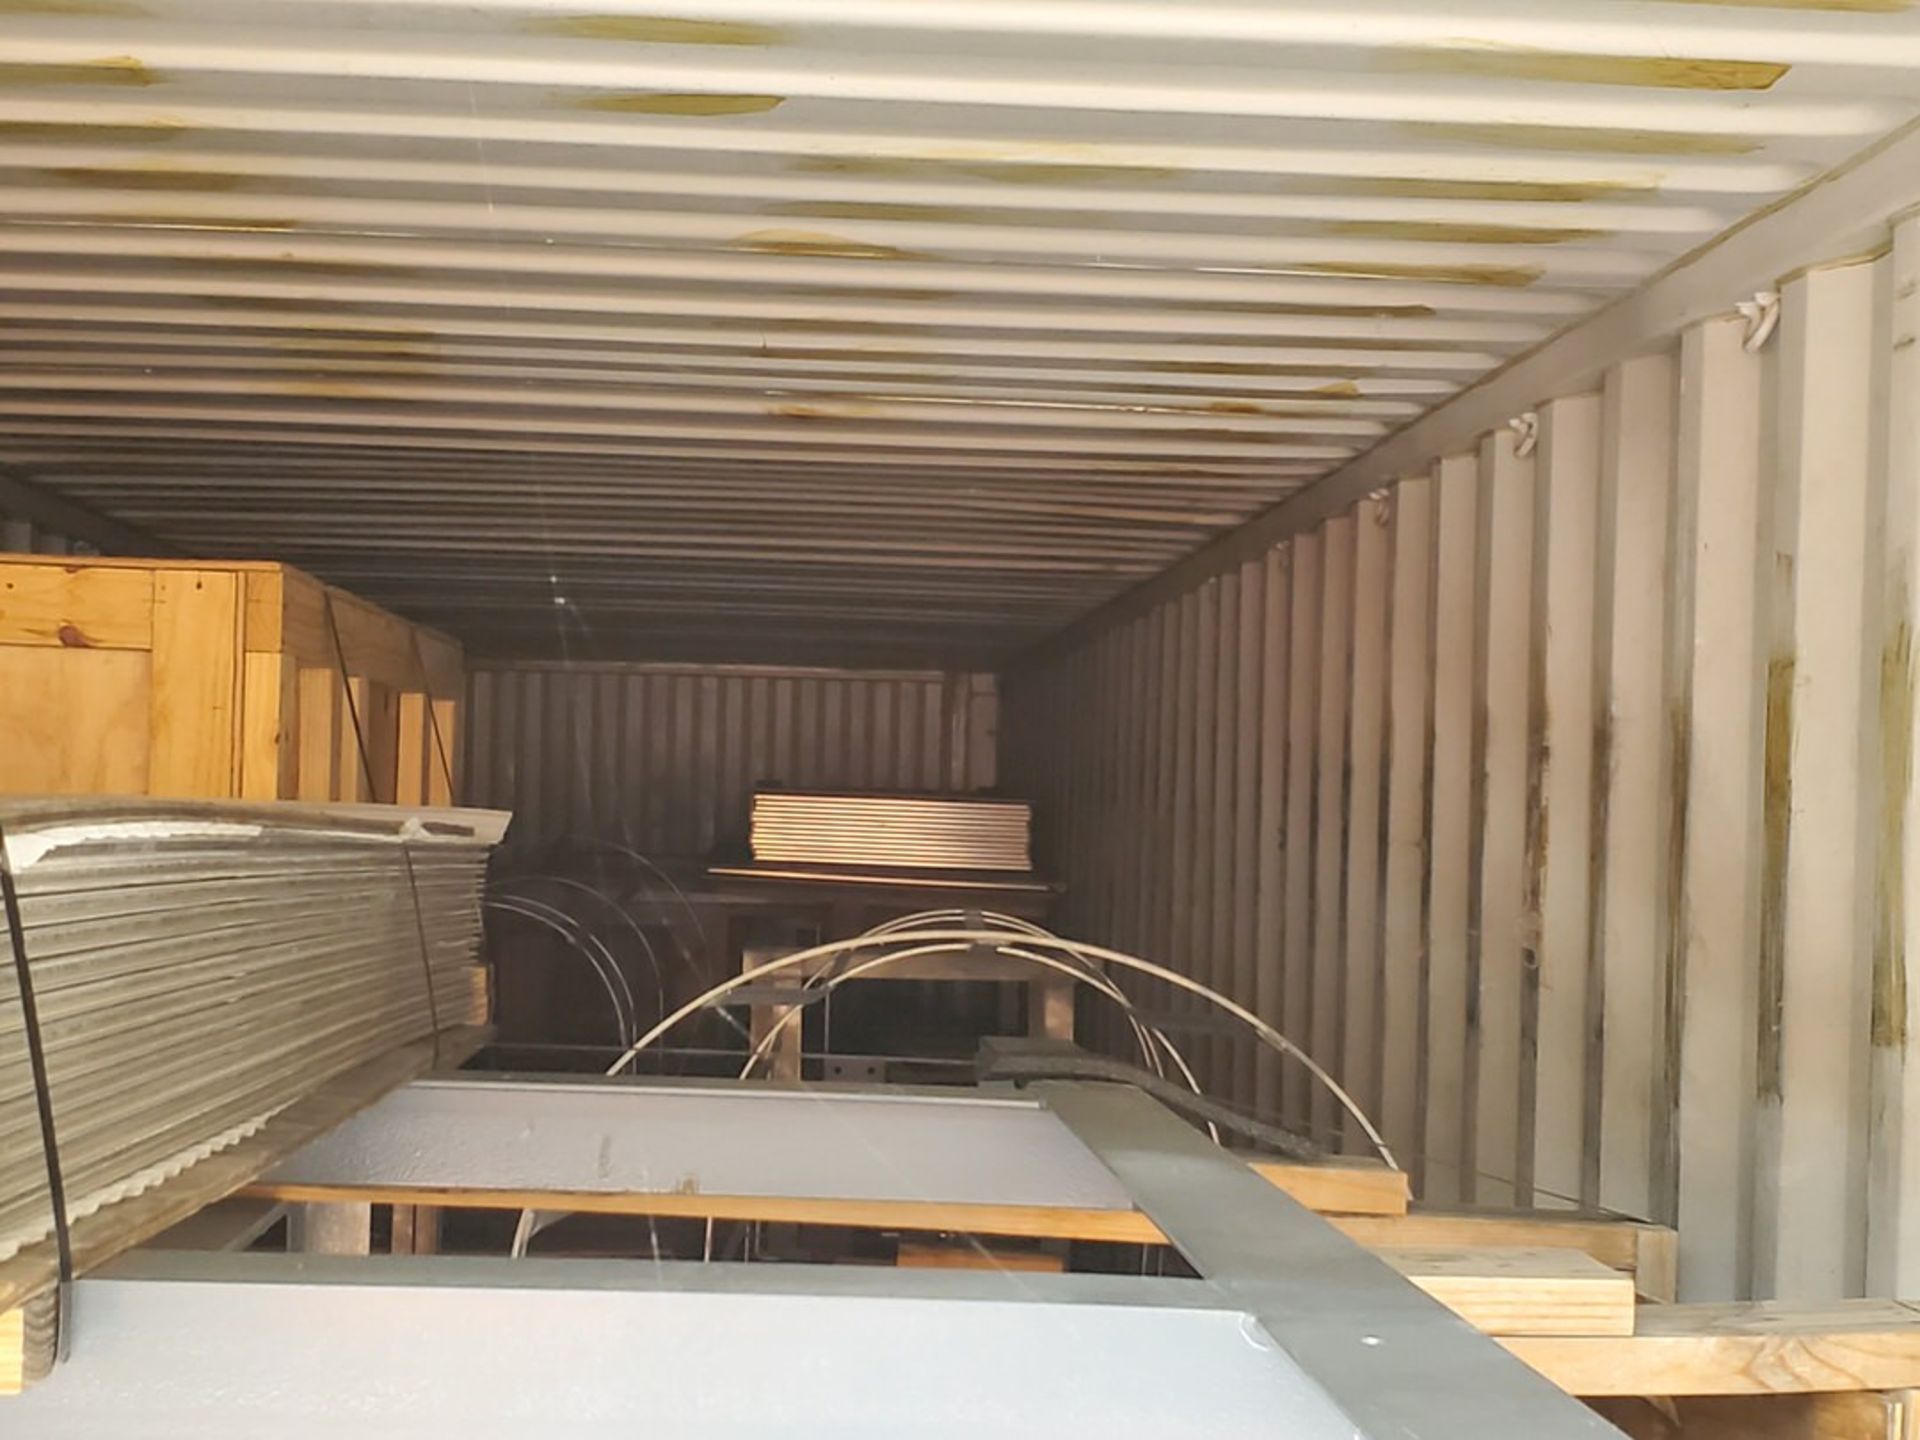 Italia Shipping Container, Dims: 40'L x 8'W x 8'6'H; W/ Cooler Contents; To Include But Not - Image 20 of 29